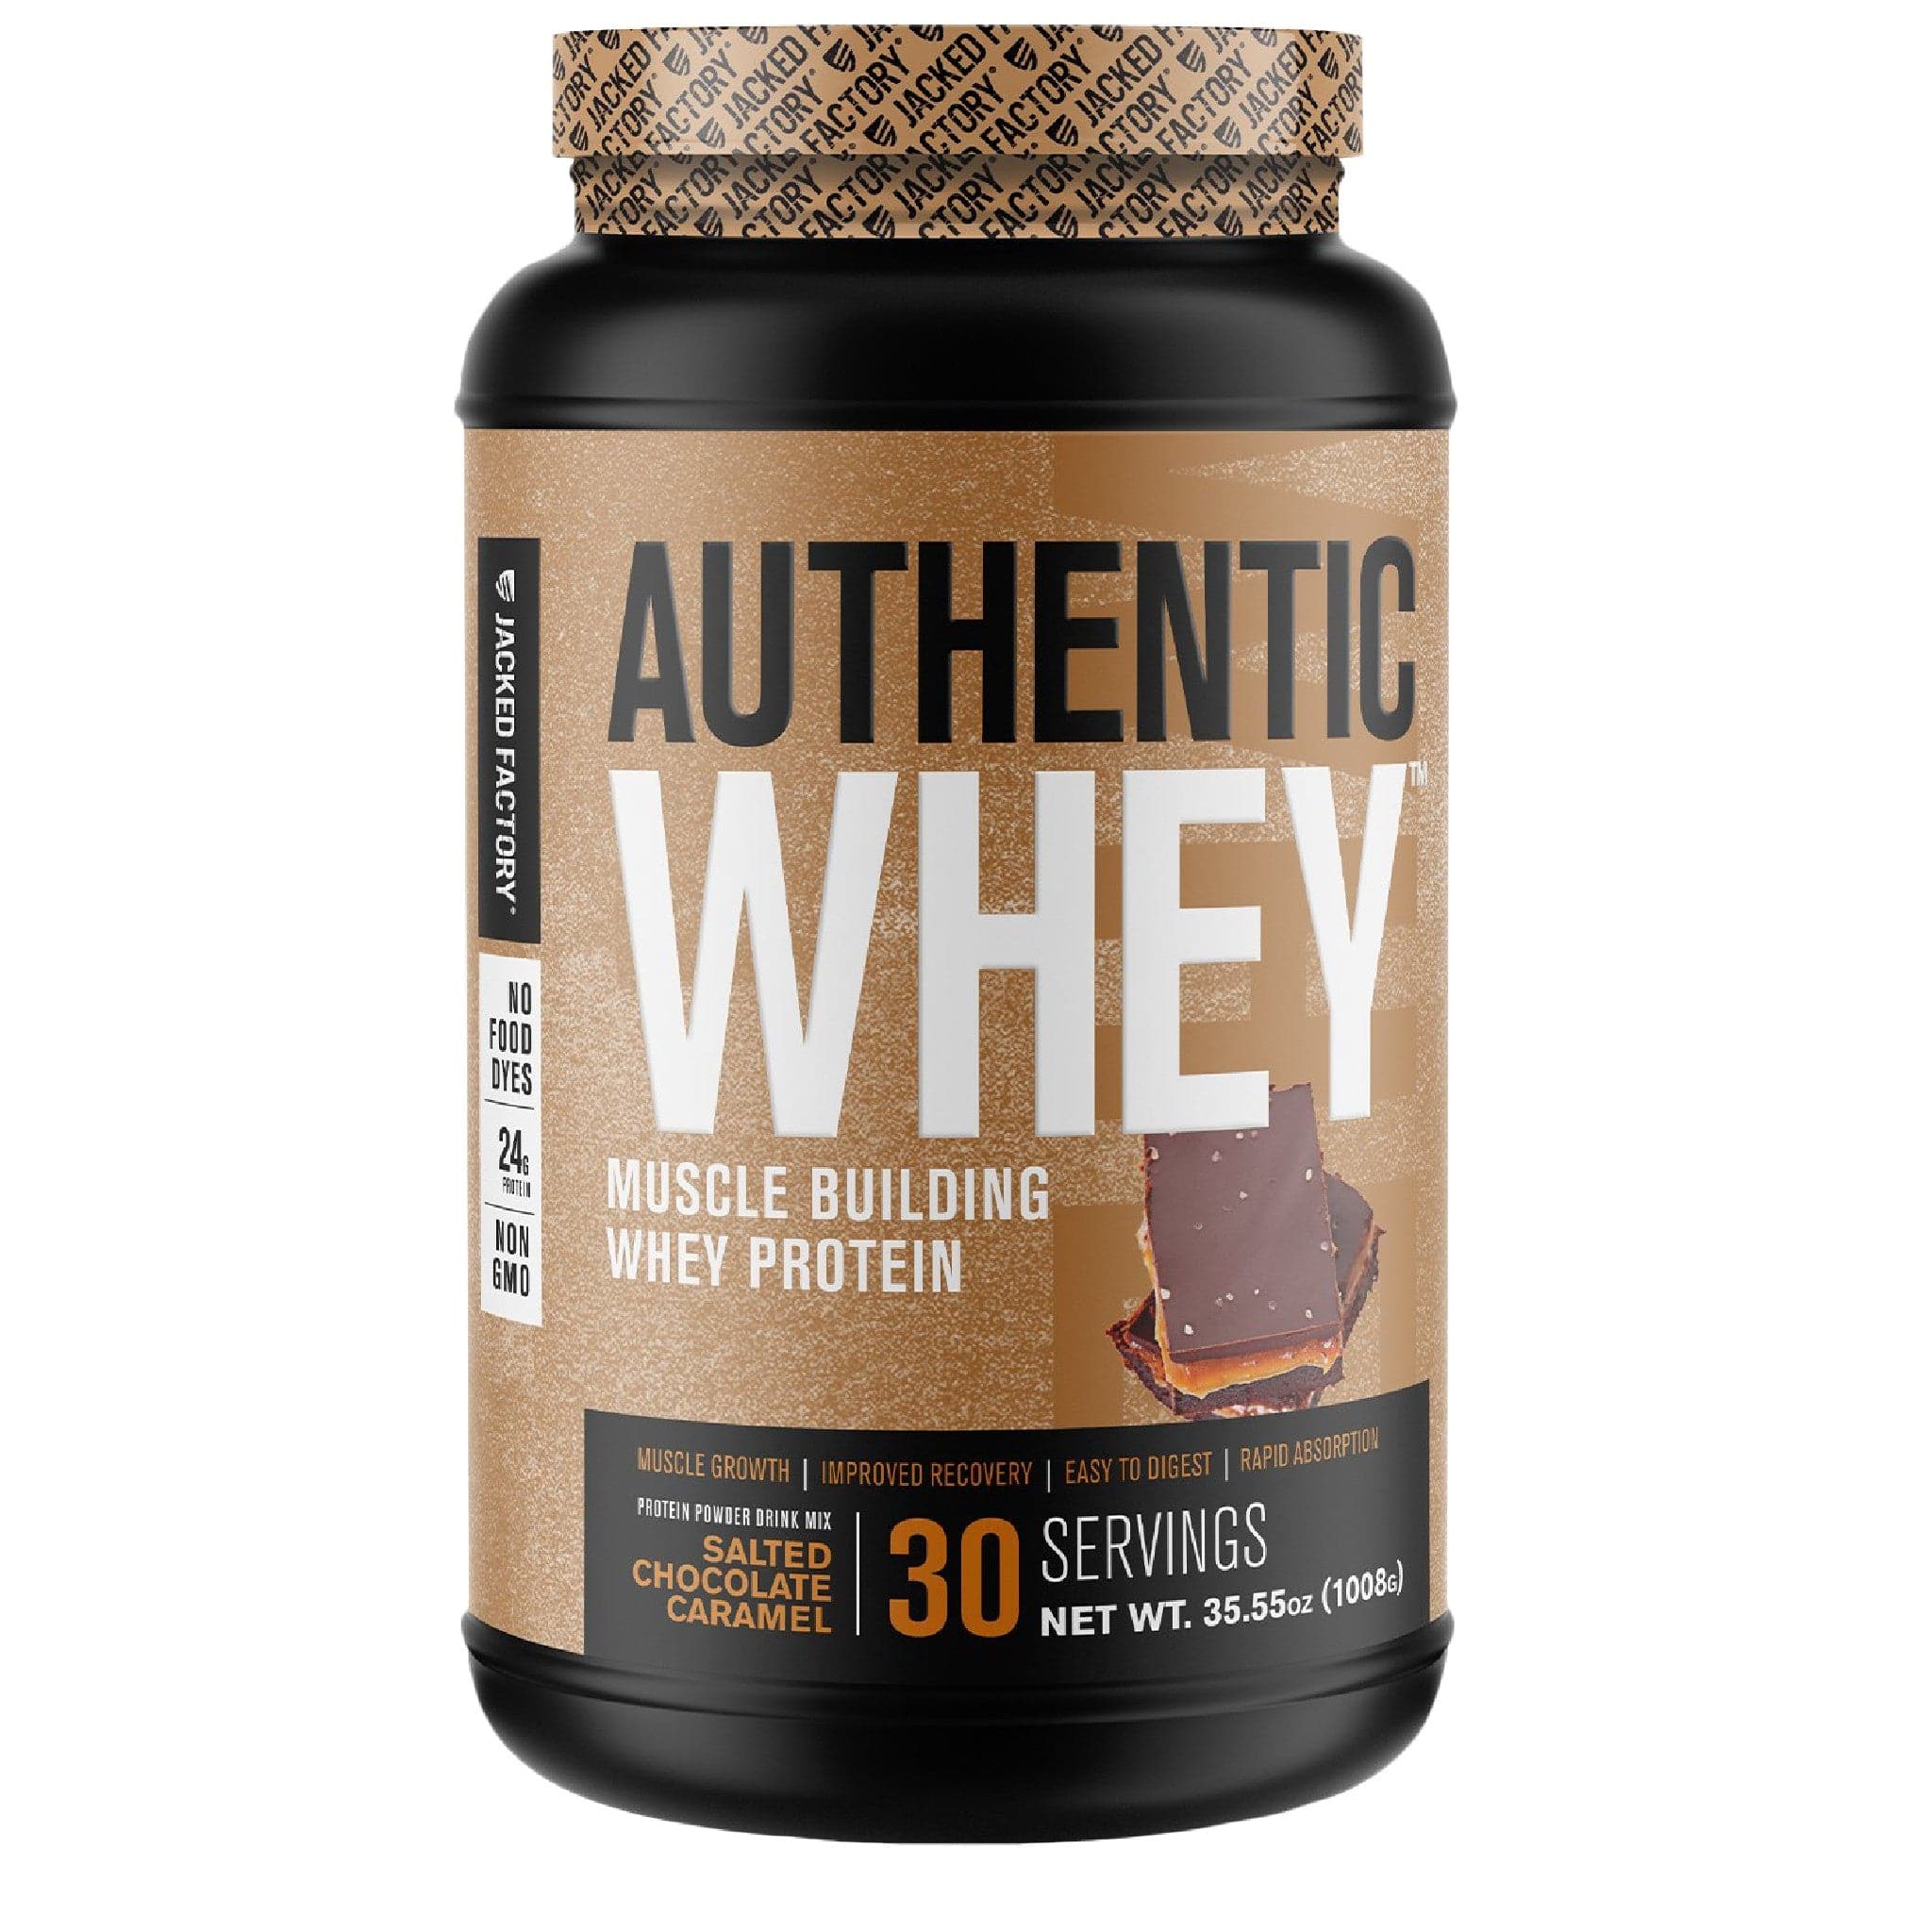 Jacked Factory Authentic Whey 30 portions